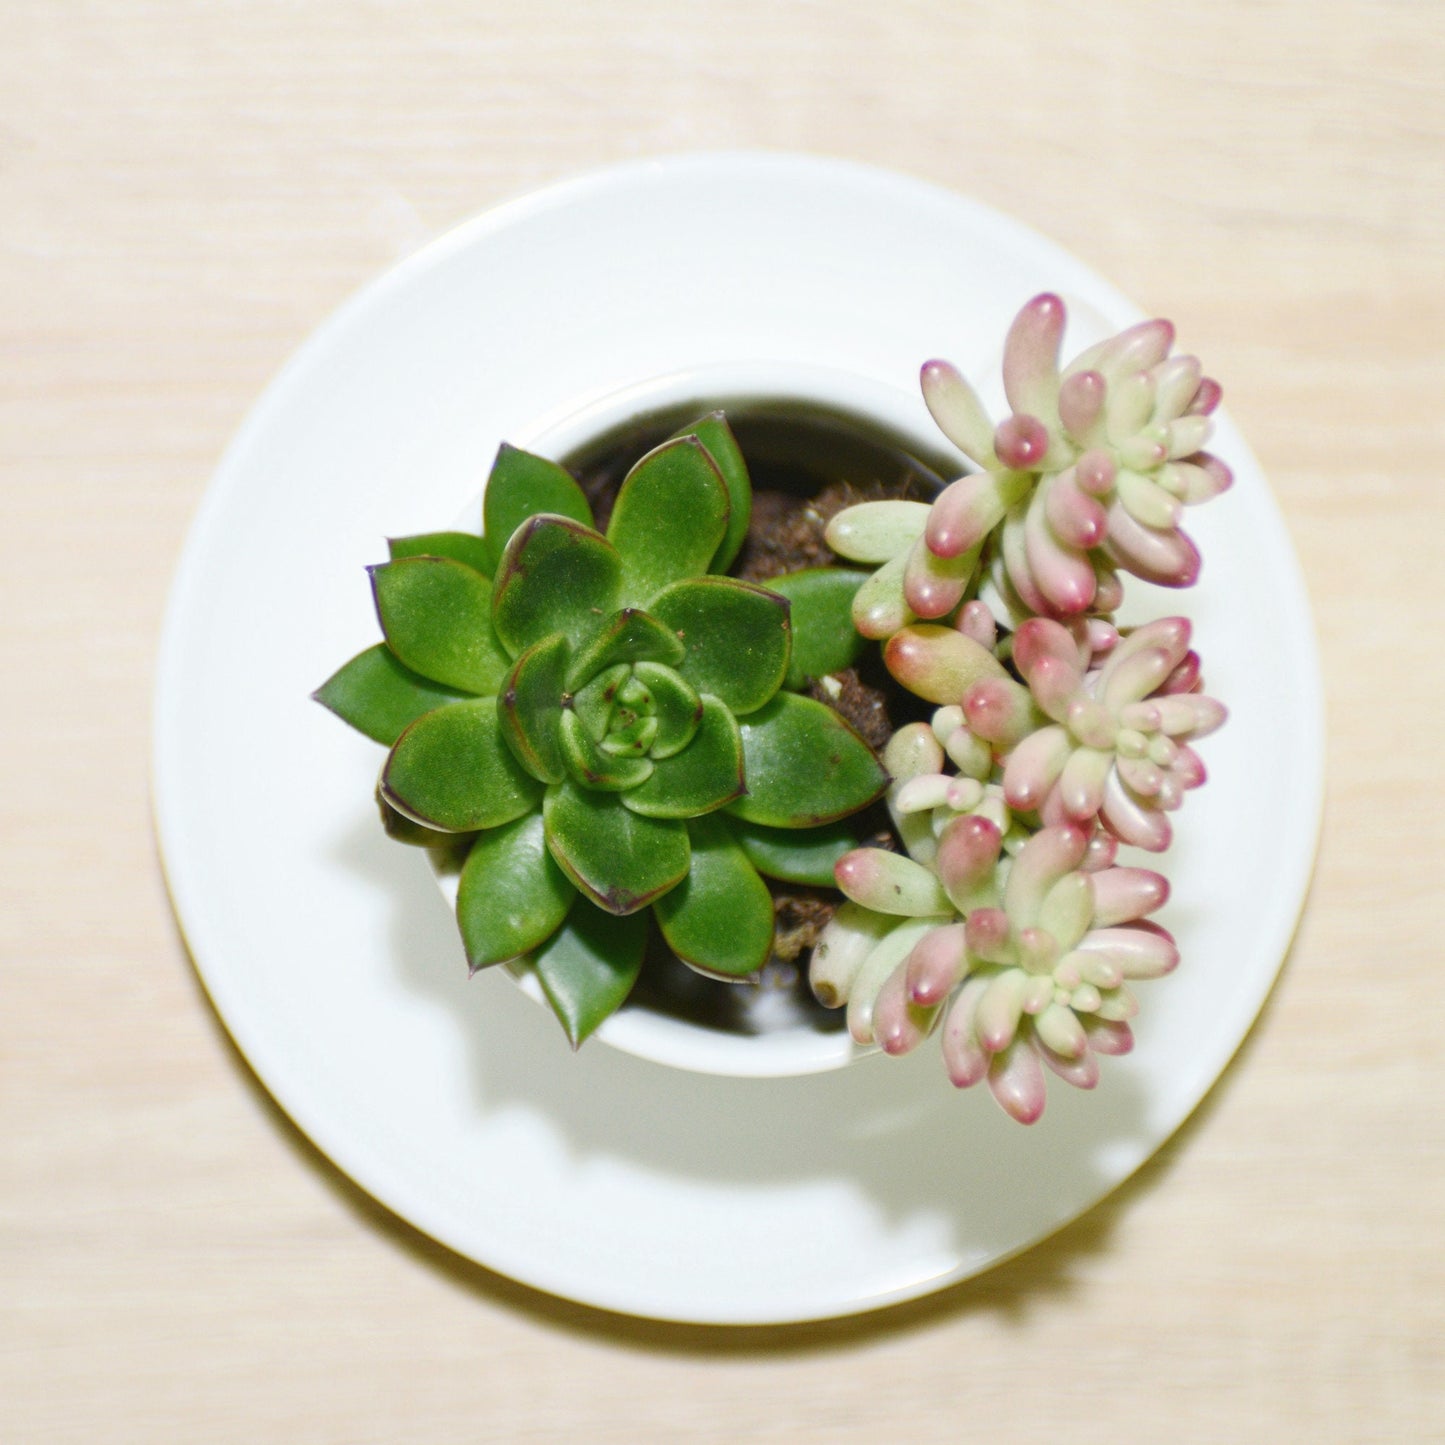 Succulents in a Coffee Cup